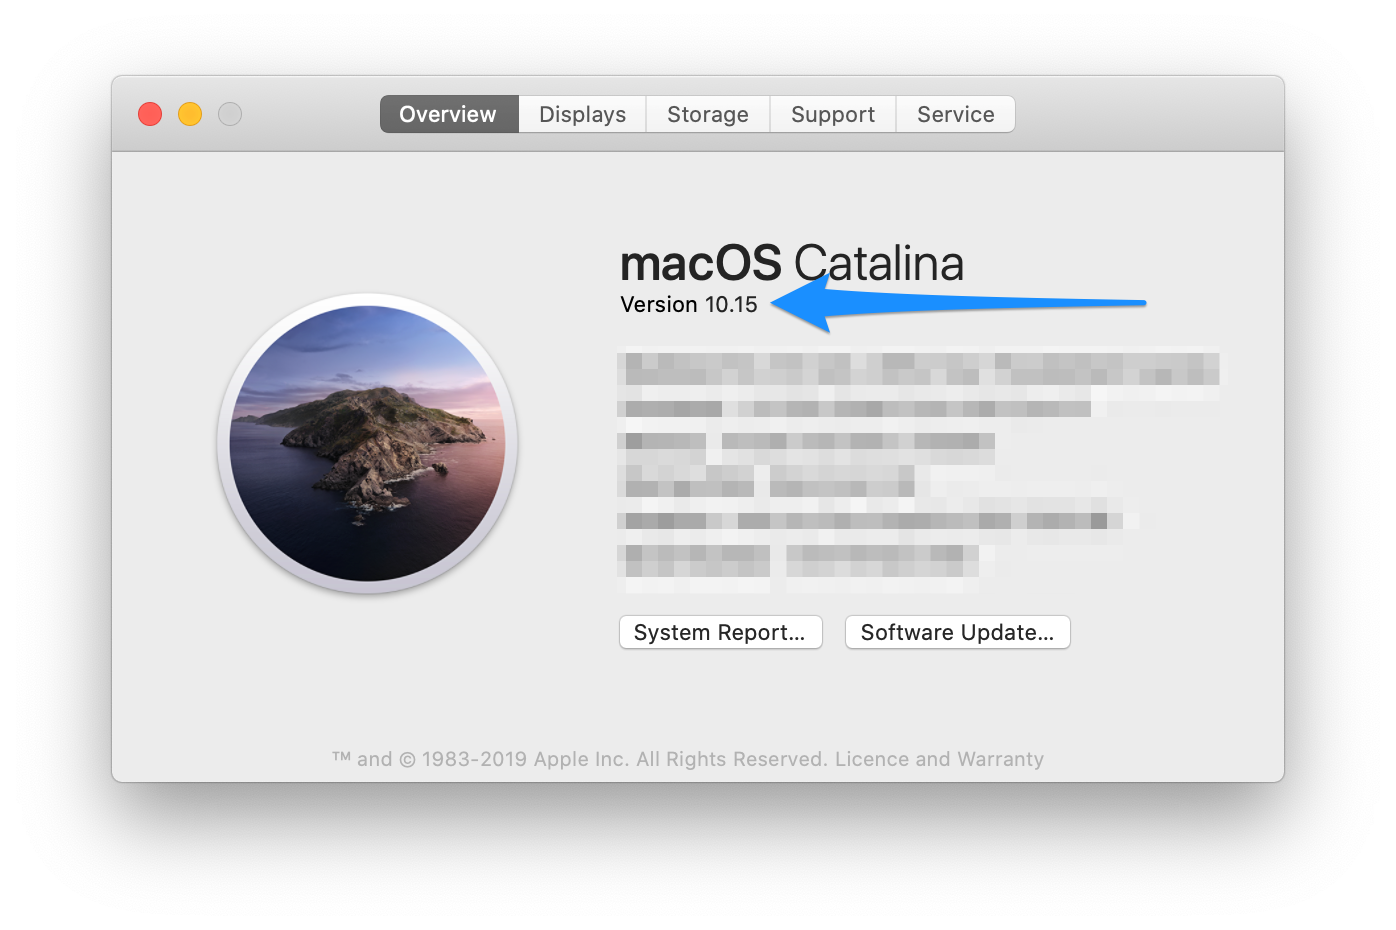 Install iphone apps on mac